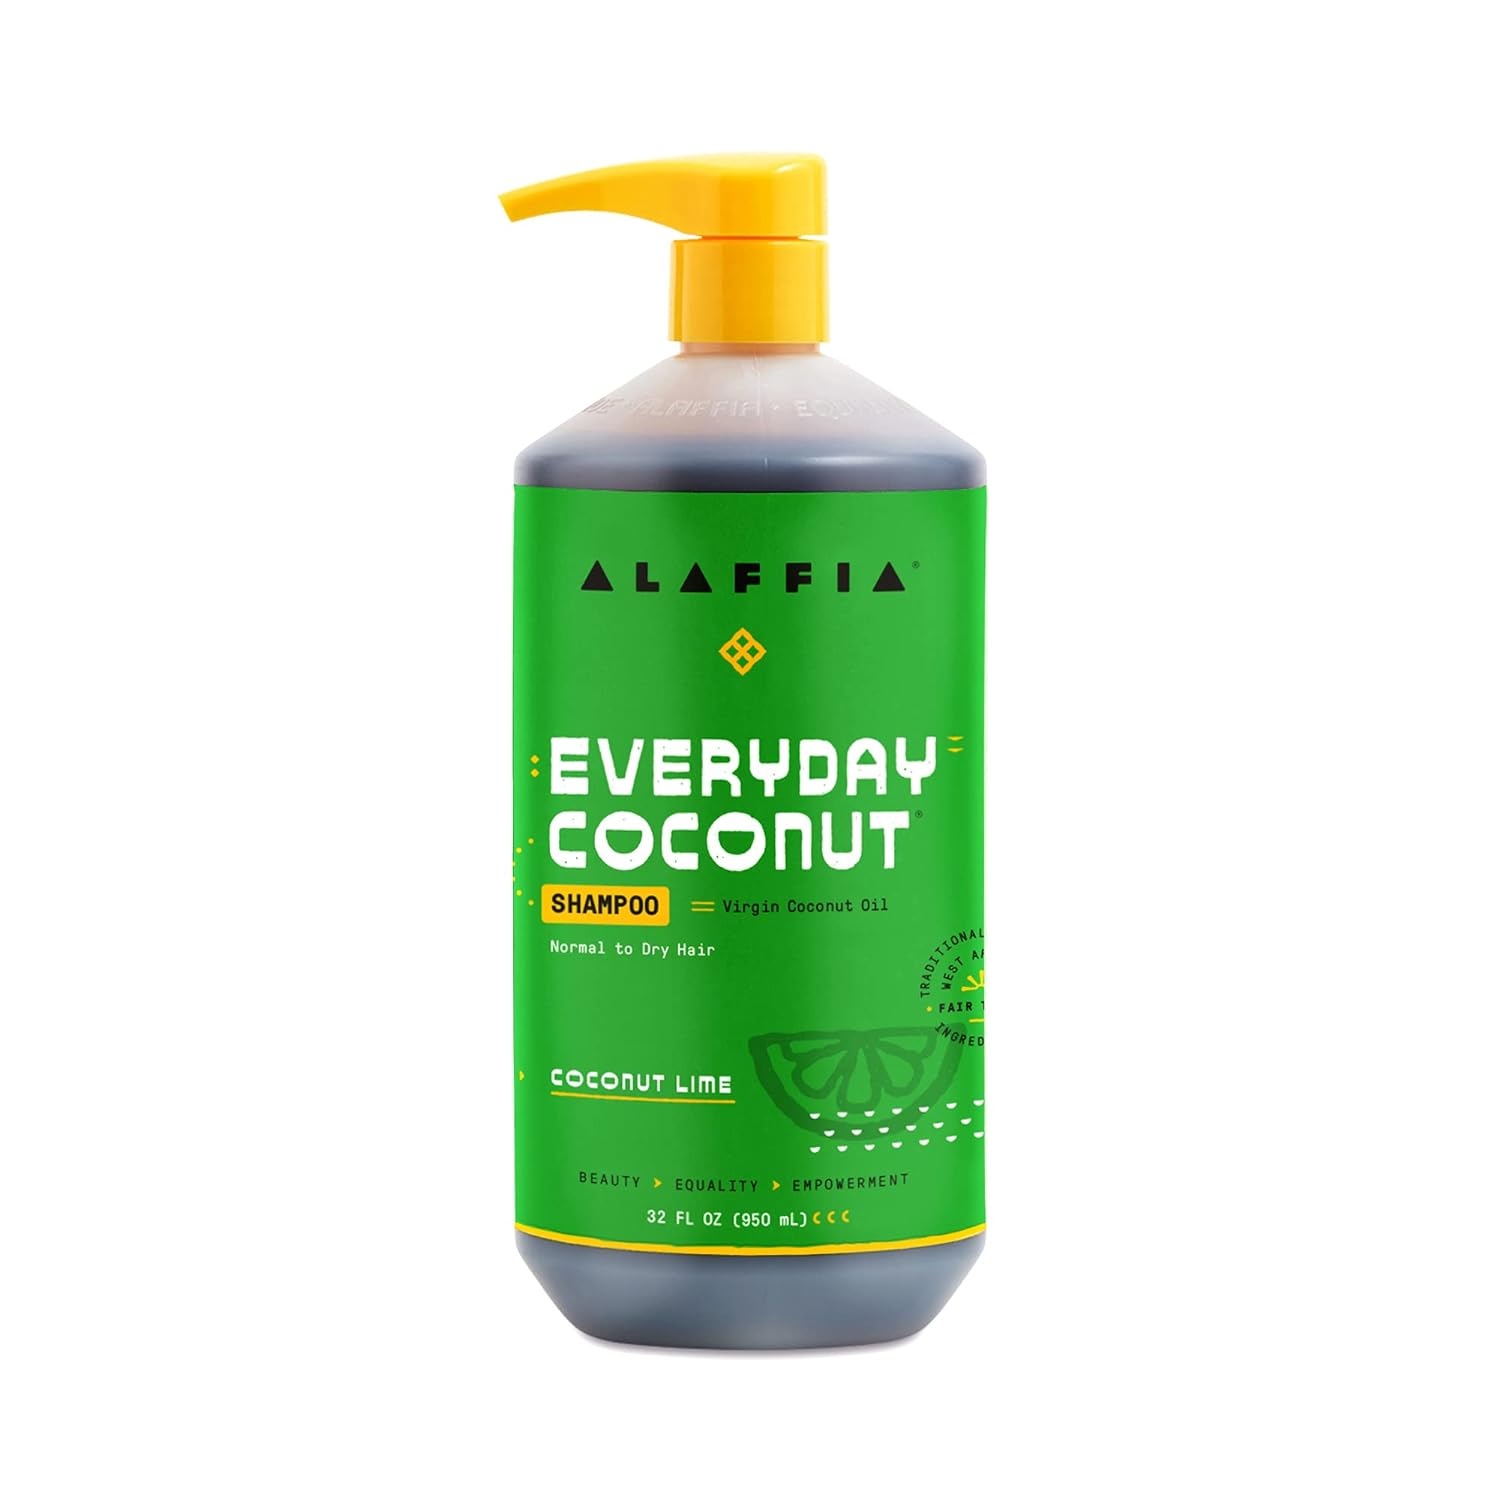 Alaffia - Everyday Coconut Shampoo, Dry to Extra Dry Hair, Gentle Support to Cleanse, Hydrate, and Stimulate Hair with African Ginger, Coconut Oil, and Shea Butter, Fair Trade, Coconut Lime, 32 s